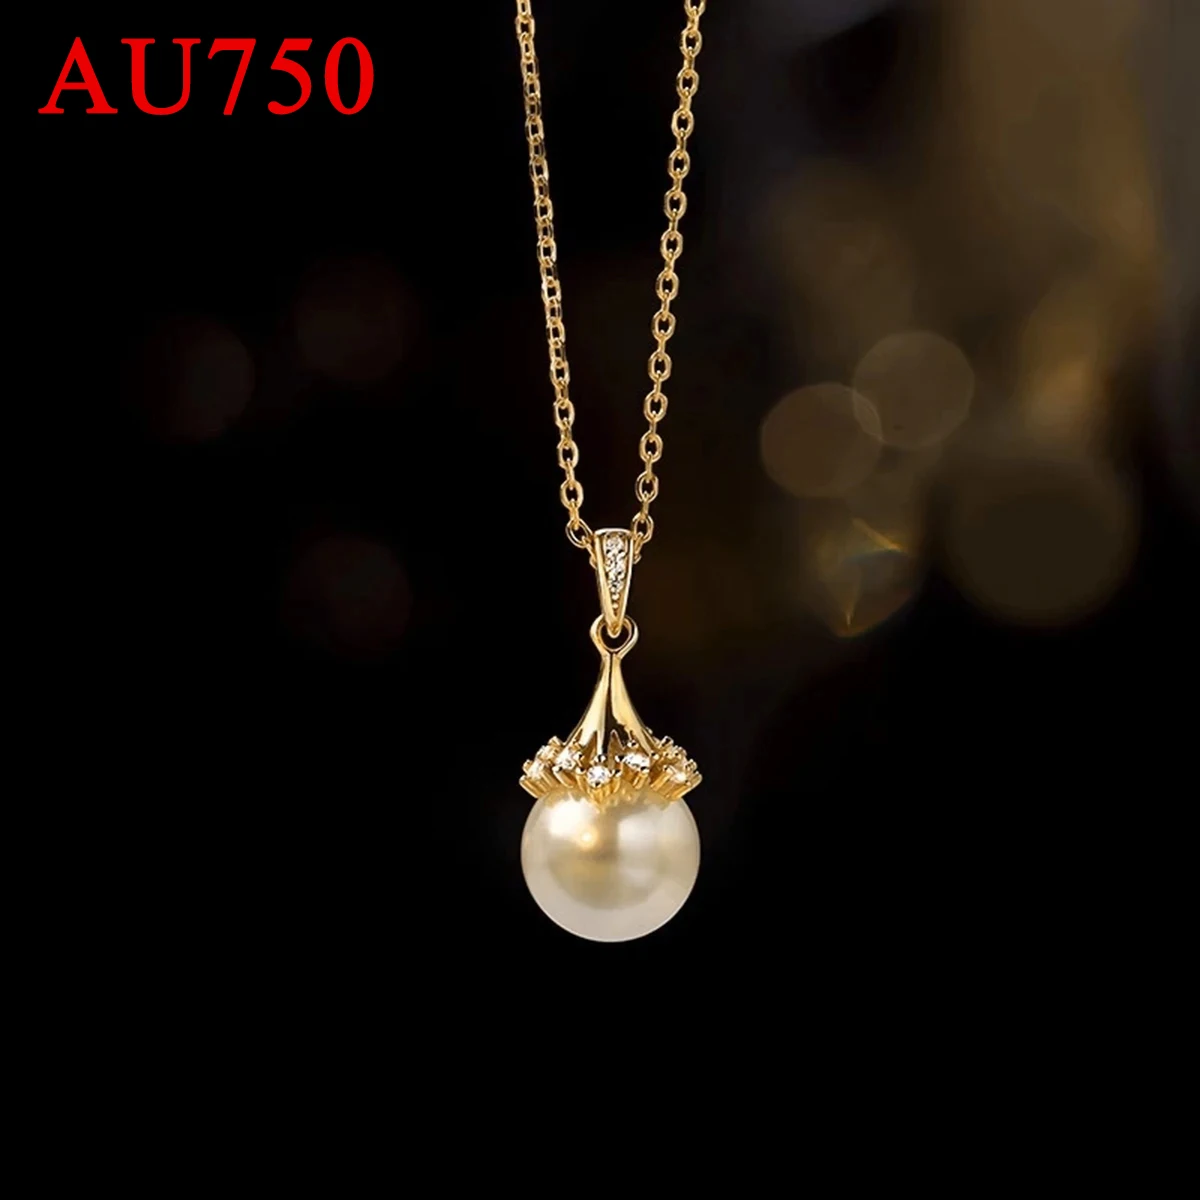 Szjinao 100% AU750 18K Gold Natrual Fresh Water Pearl Necklace With Certificate Women Pendant Jewelry Luxury Elegant Gift Female